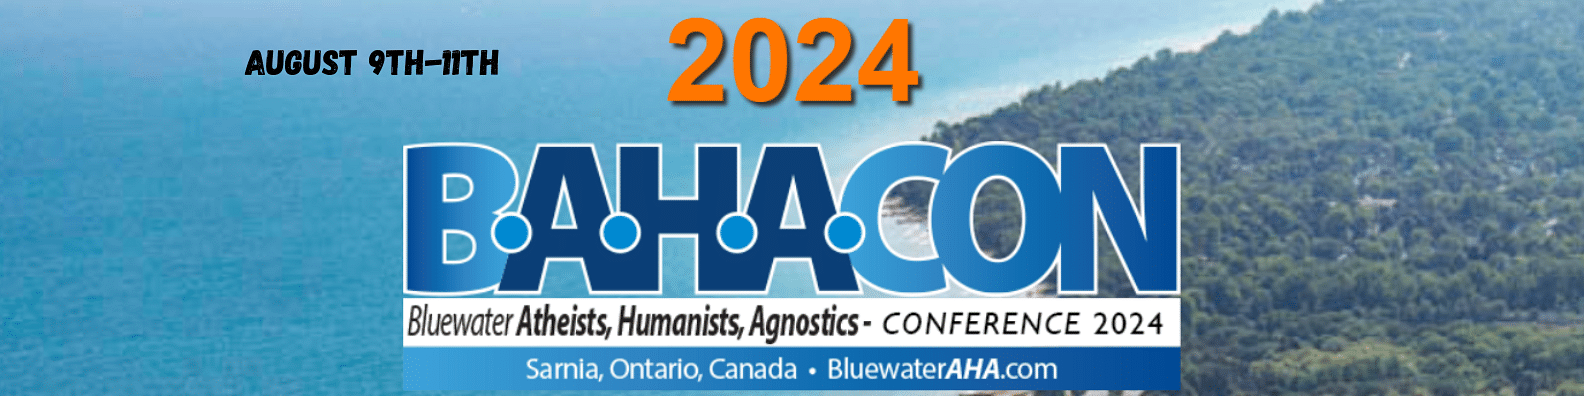 BahaCon - Bluewater Atheists, Humanists, Agnostics Conference 2024